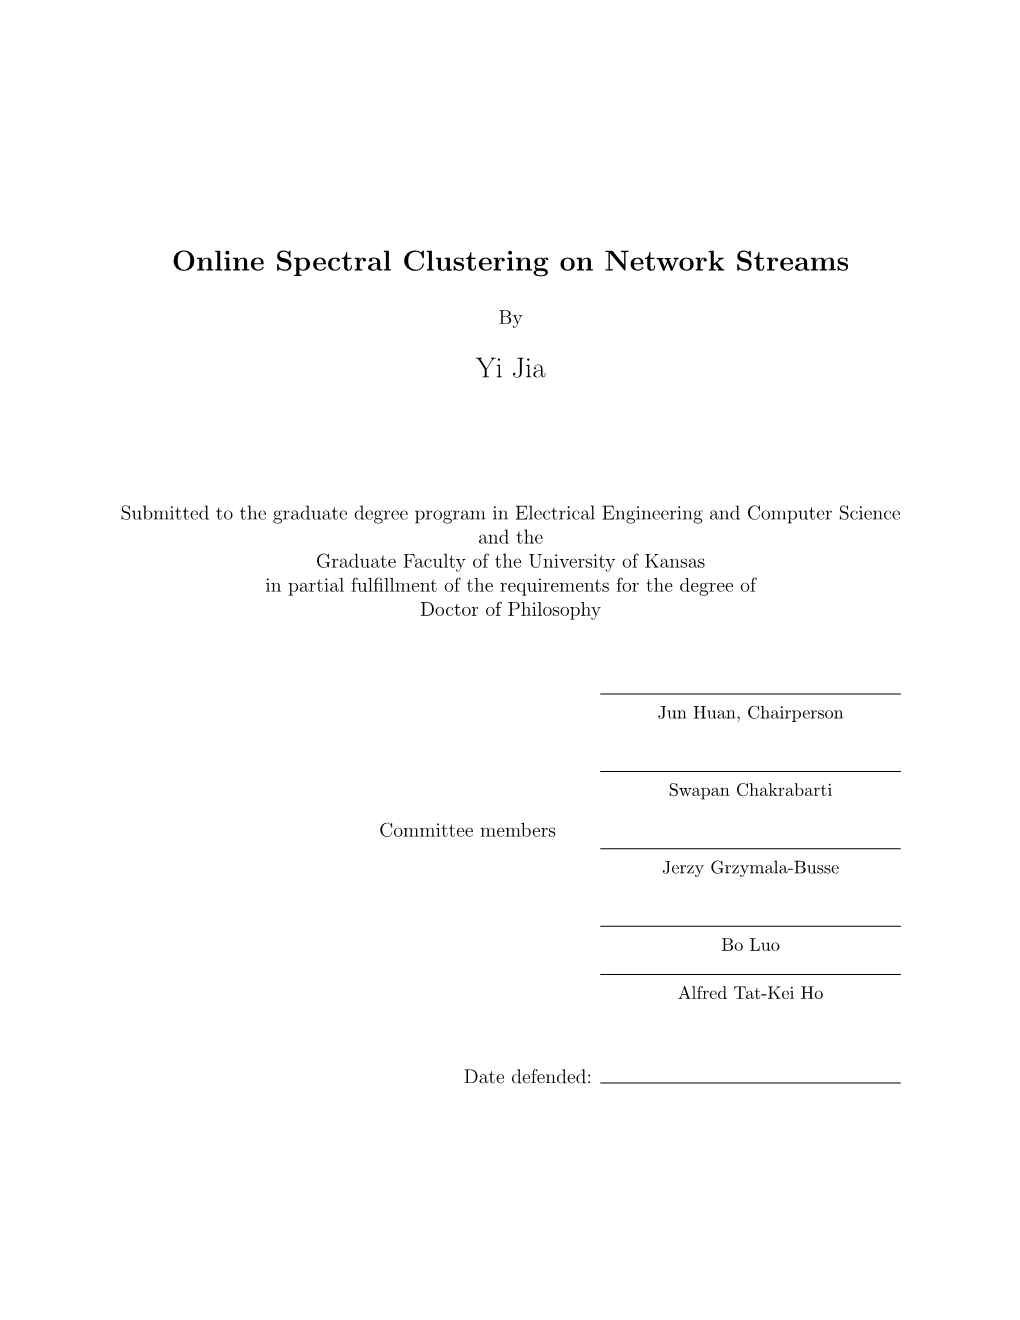 Online Spectral Clustering on Network Streams Yi